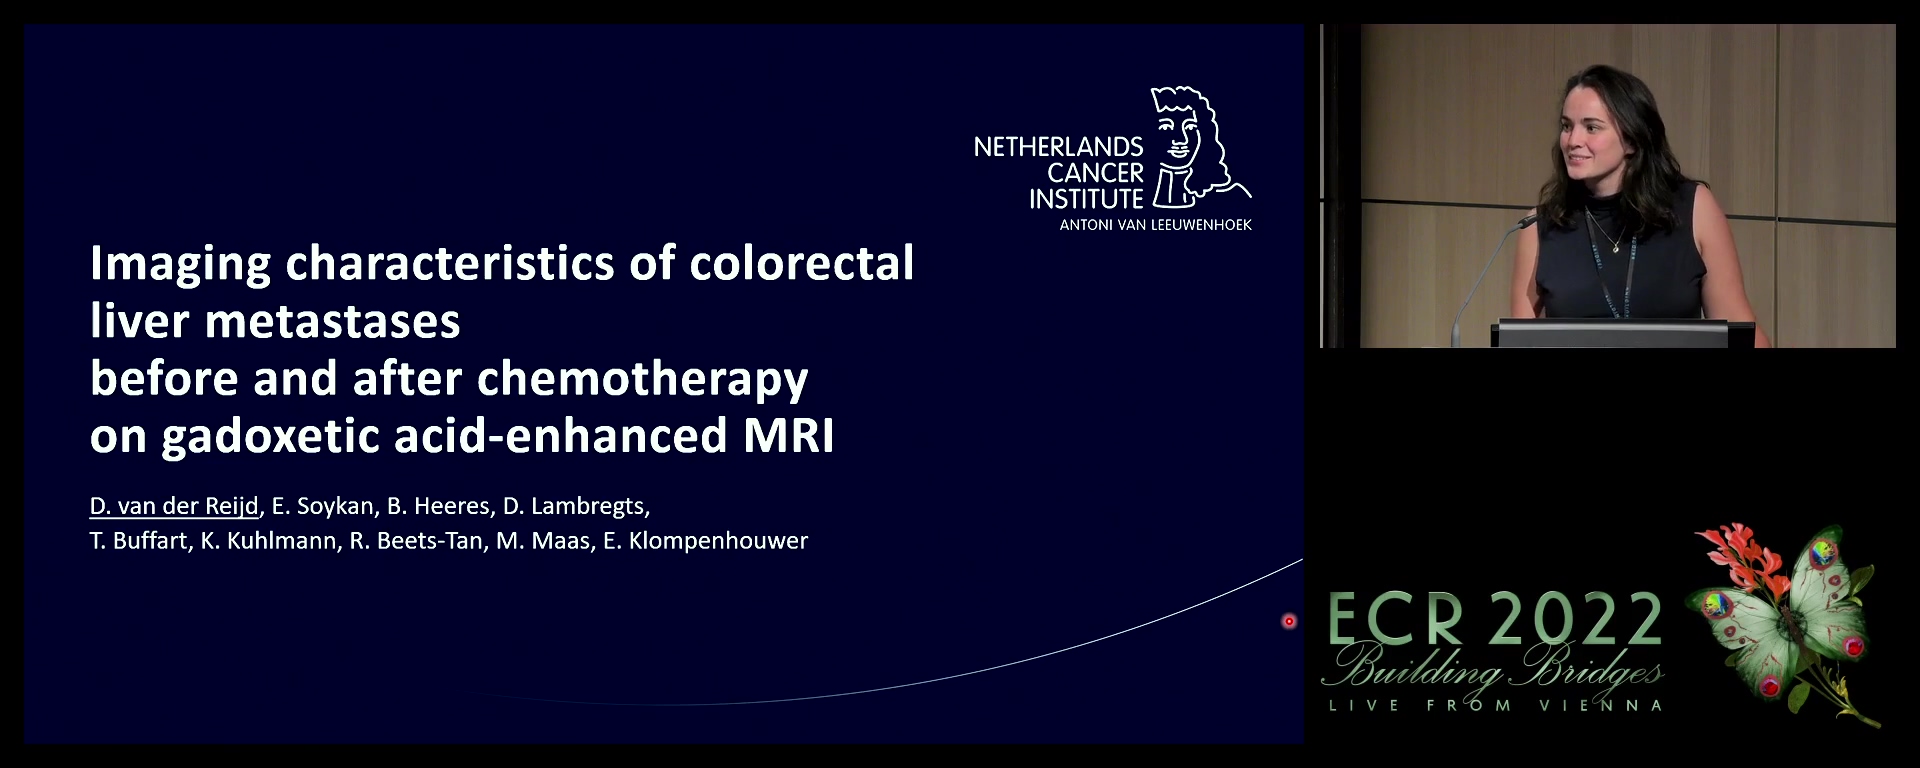 Colorectal liver metastases: MRI appearances before and after chemotherapy